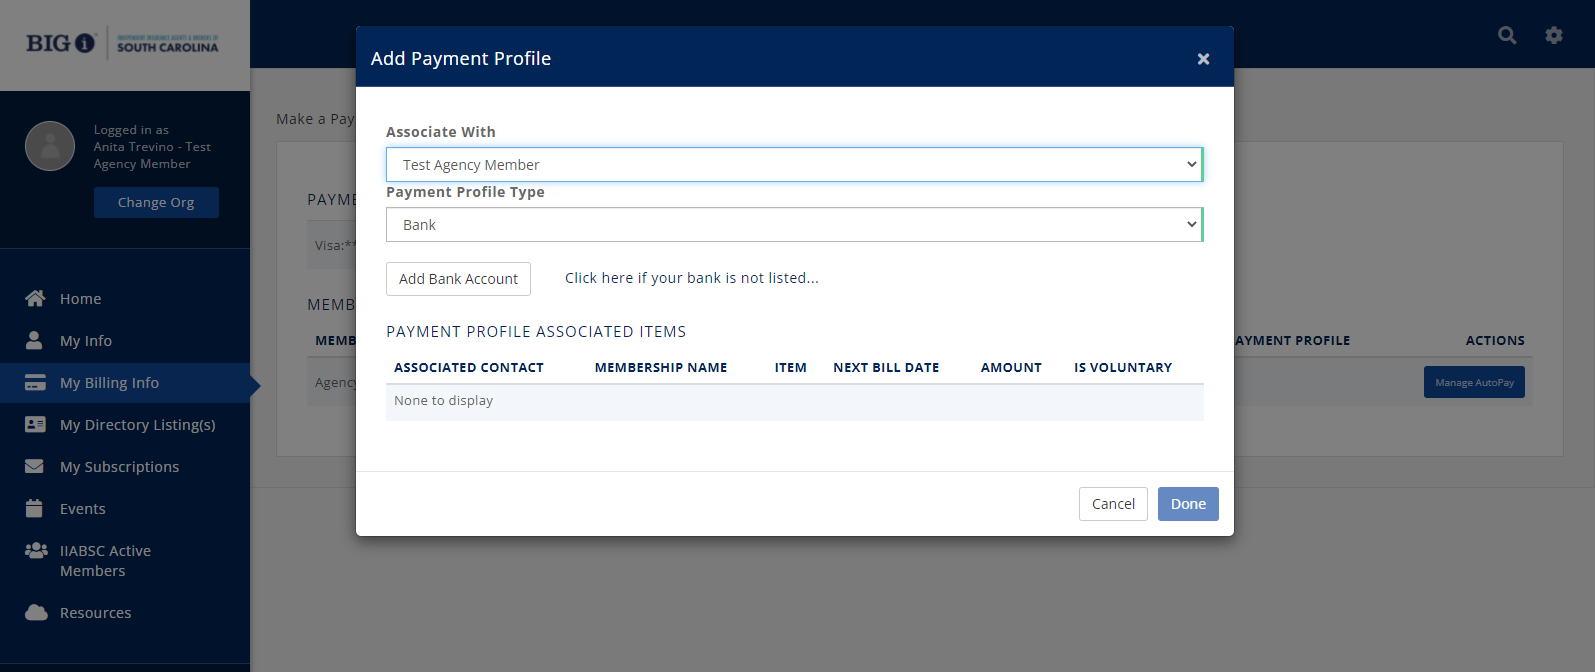 Screenshot of Add Payment Profile screen with bank account settings